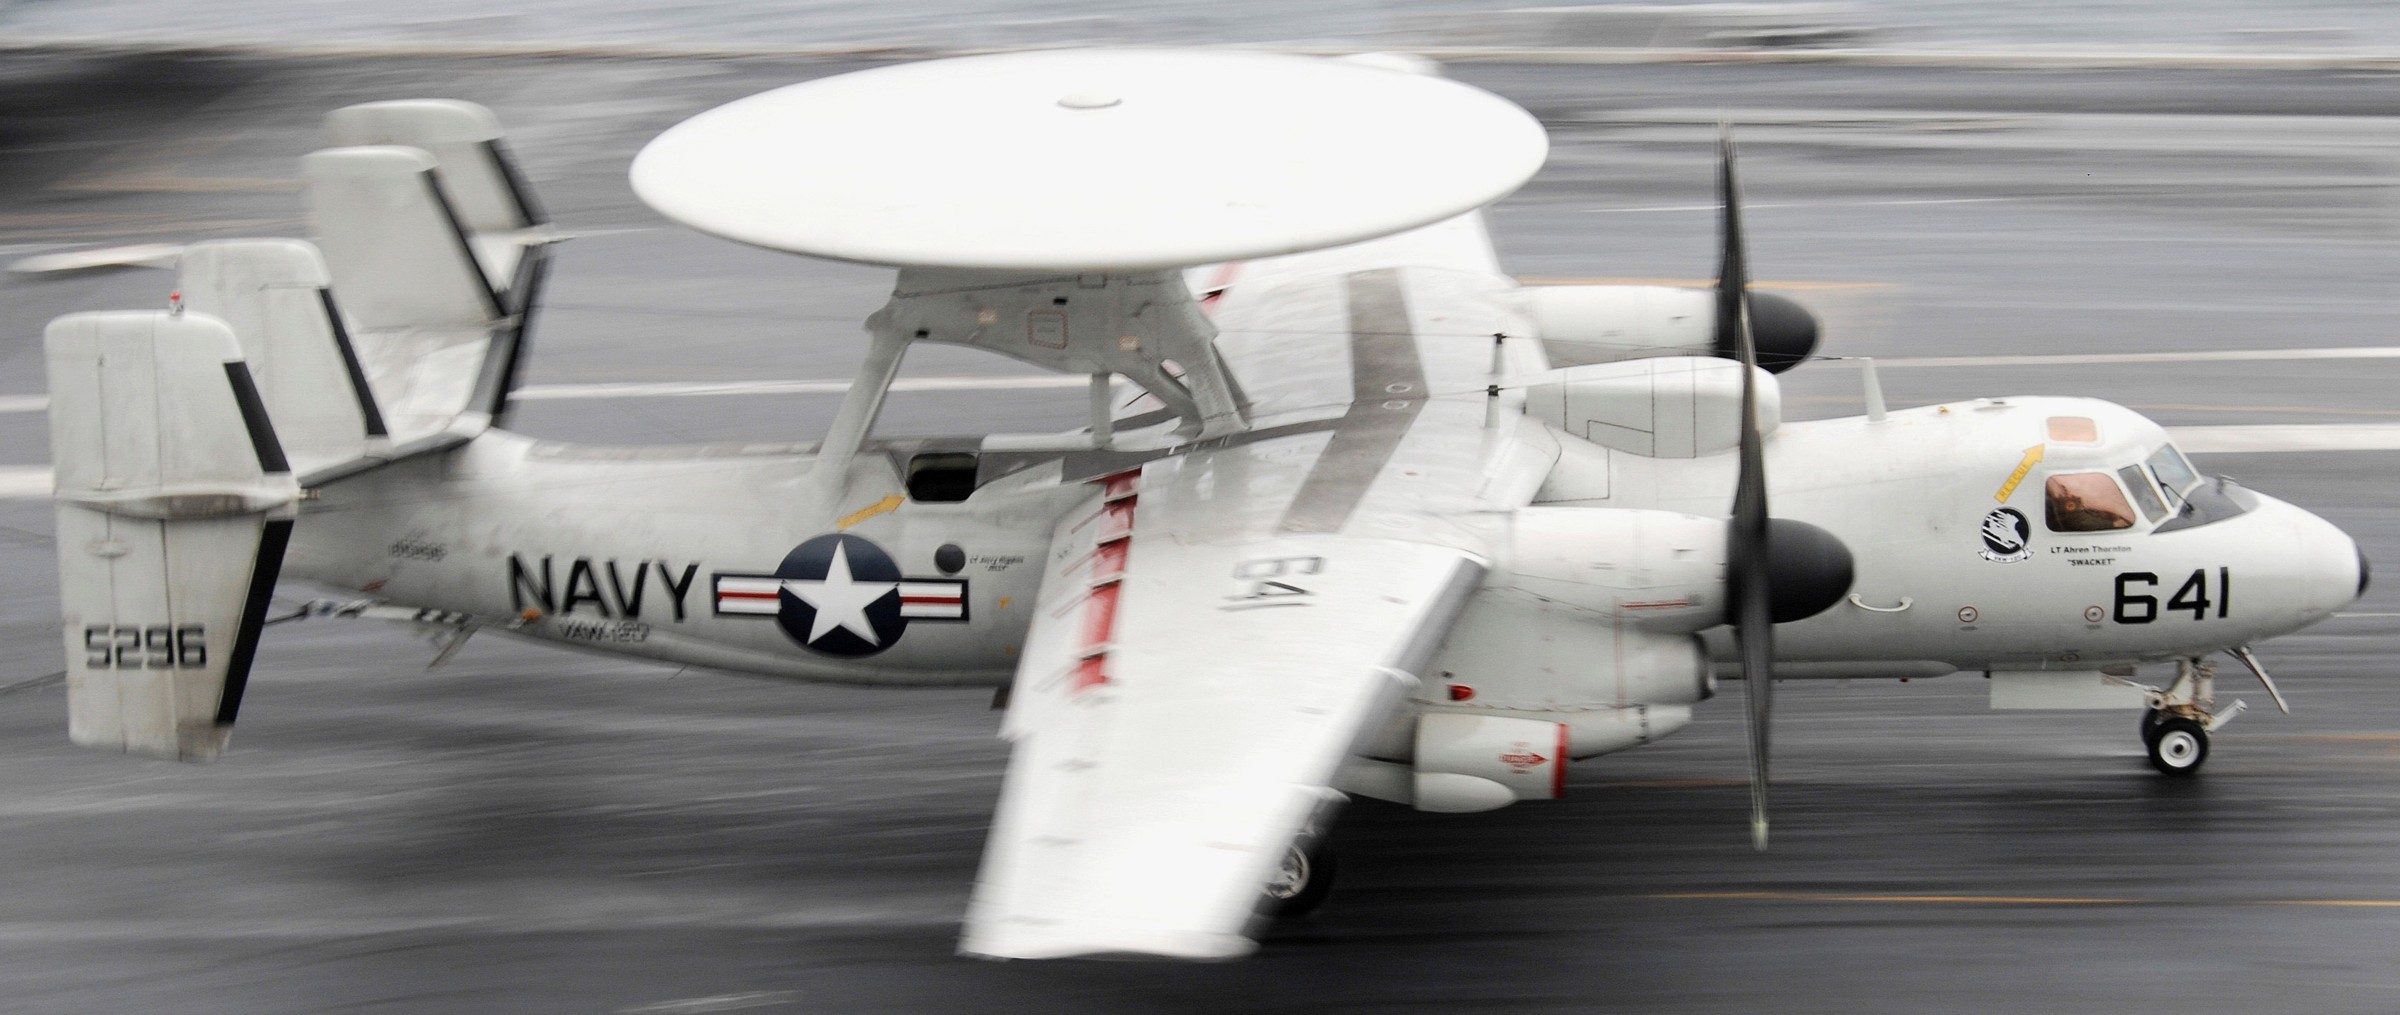 vaw-120 greyhawks carrier airborne early warning squadron e-2c hawkeye replacement uss harry s. truman cvn-75 93